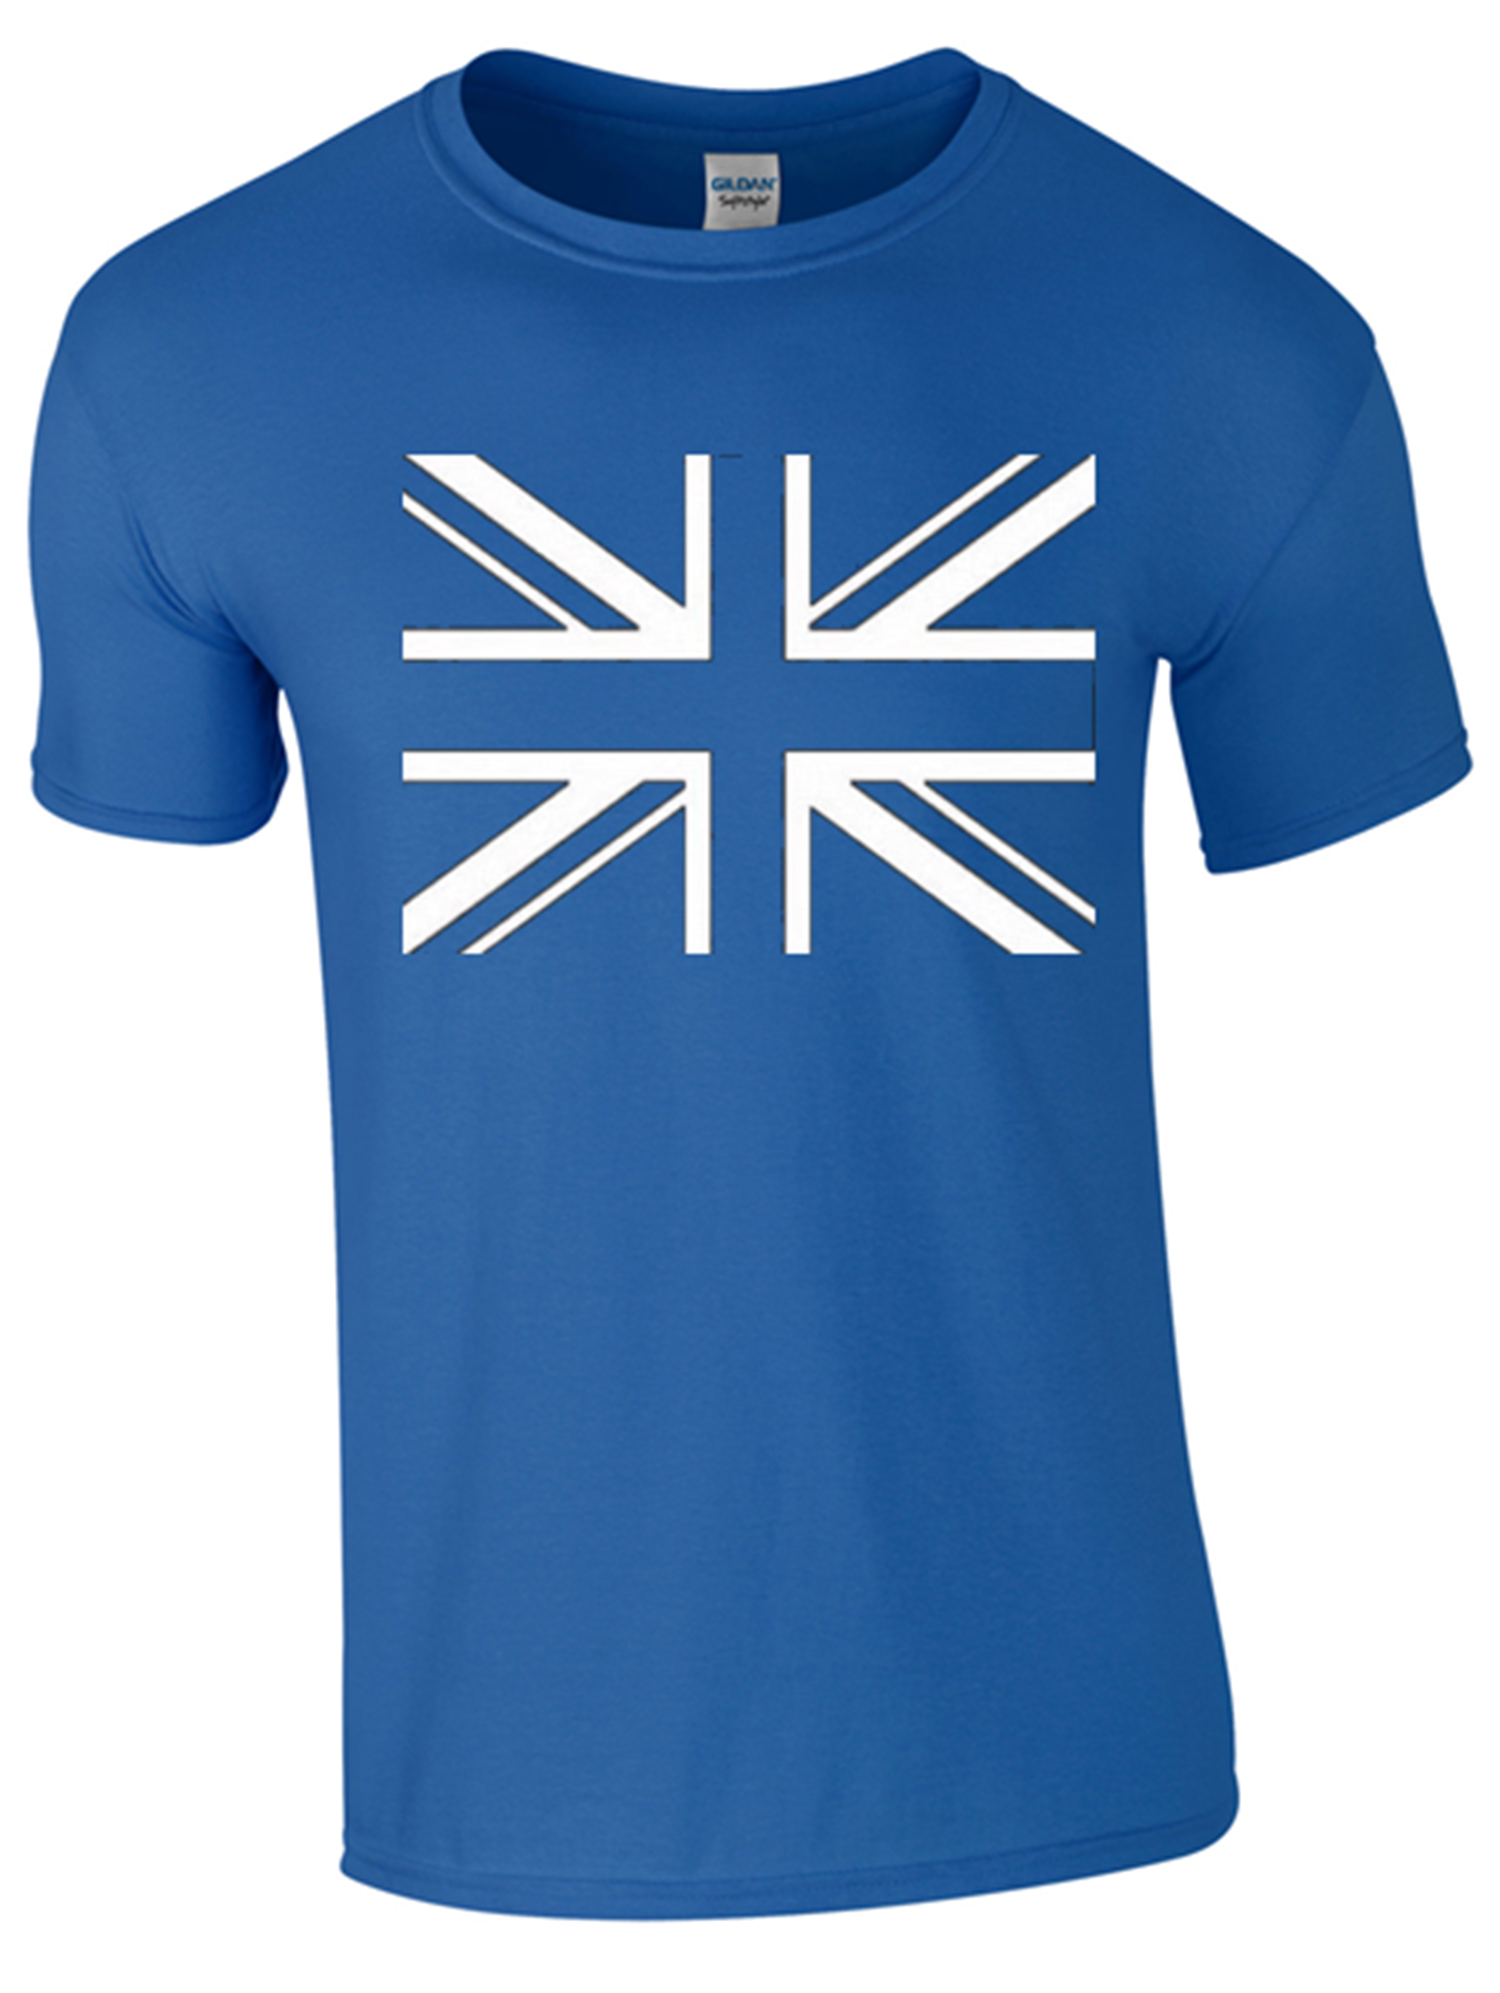 Union Jack T-Shirt Printed - Army 1157 kit S / Royal Blue Army 1157 Kit Veterans Owned Business